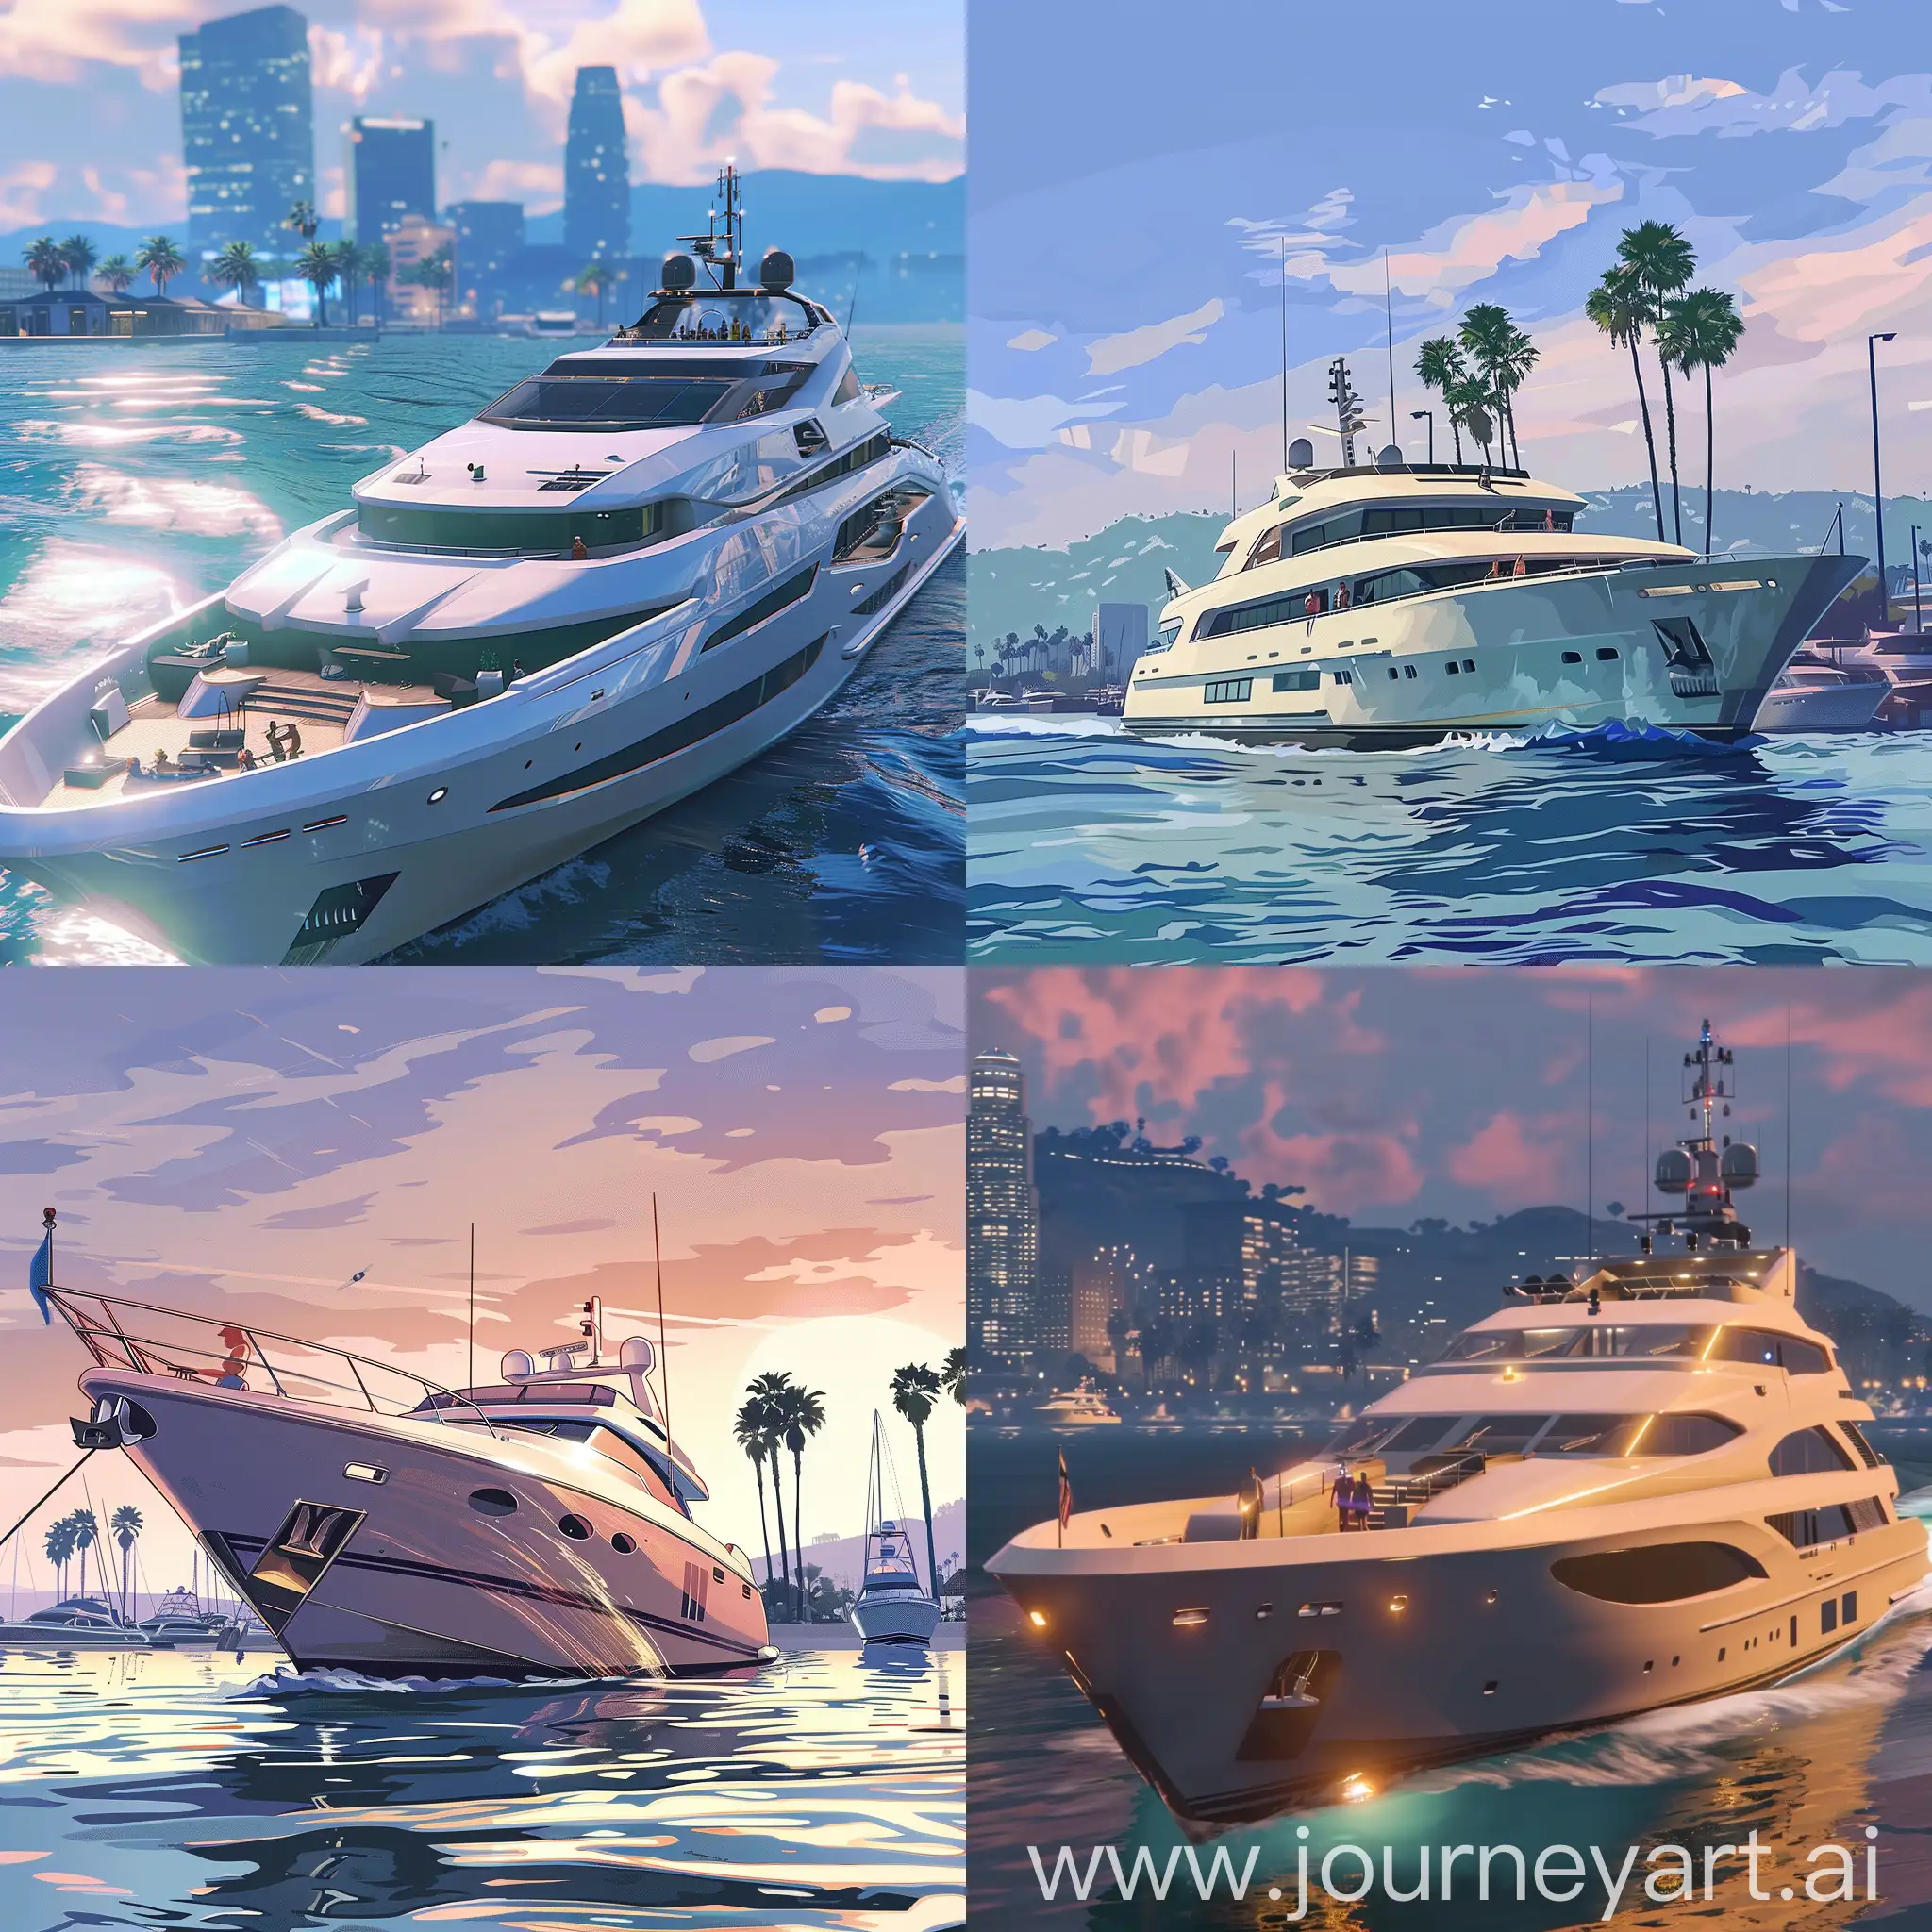 superyacht from the game GTA Five, vacationing people can be seen on the yacht background